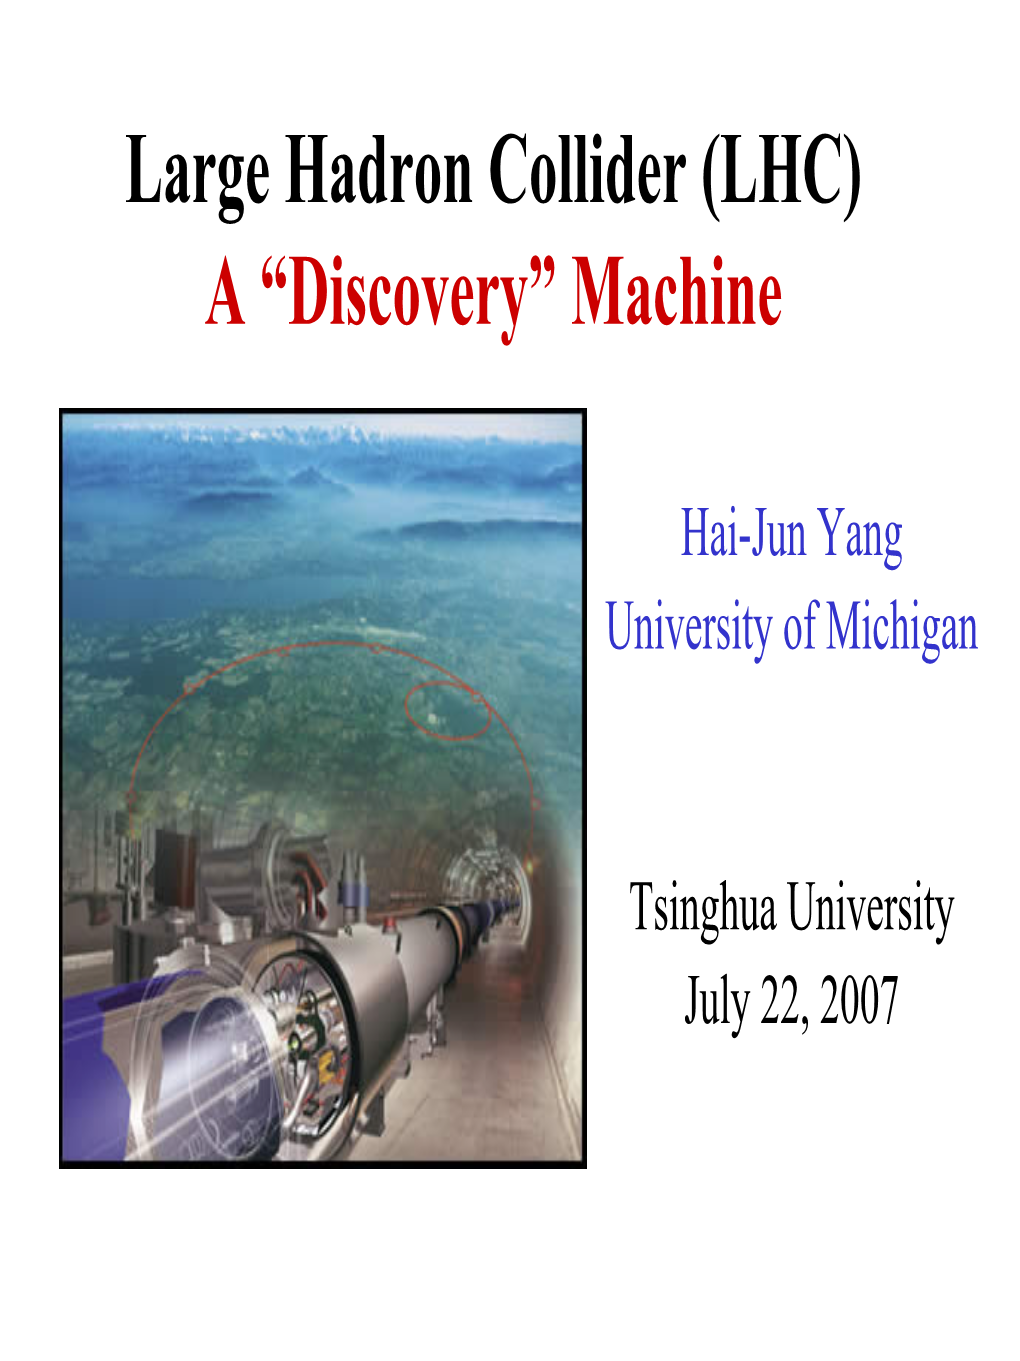 Large Hadron Collider (LHC) a “Discovery” Machine